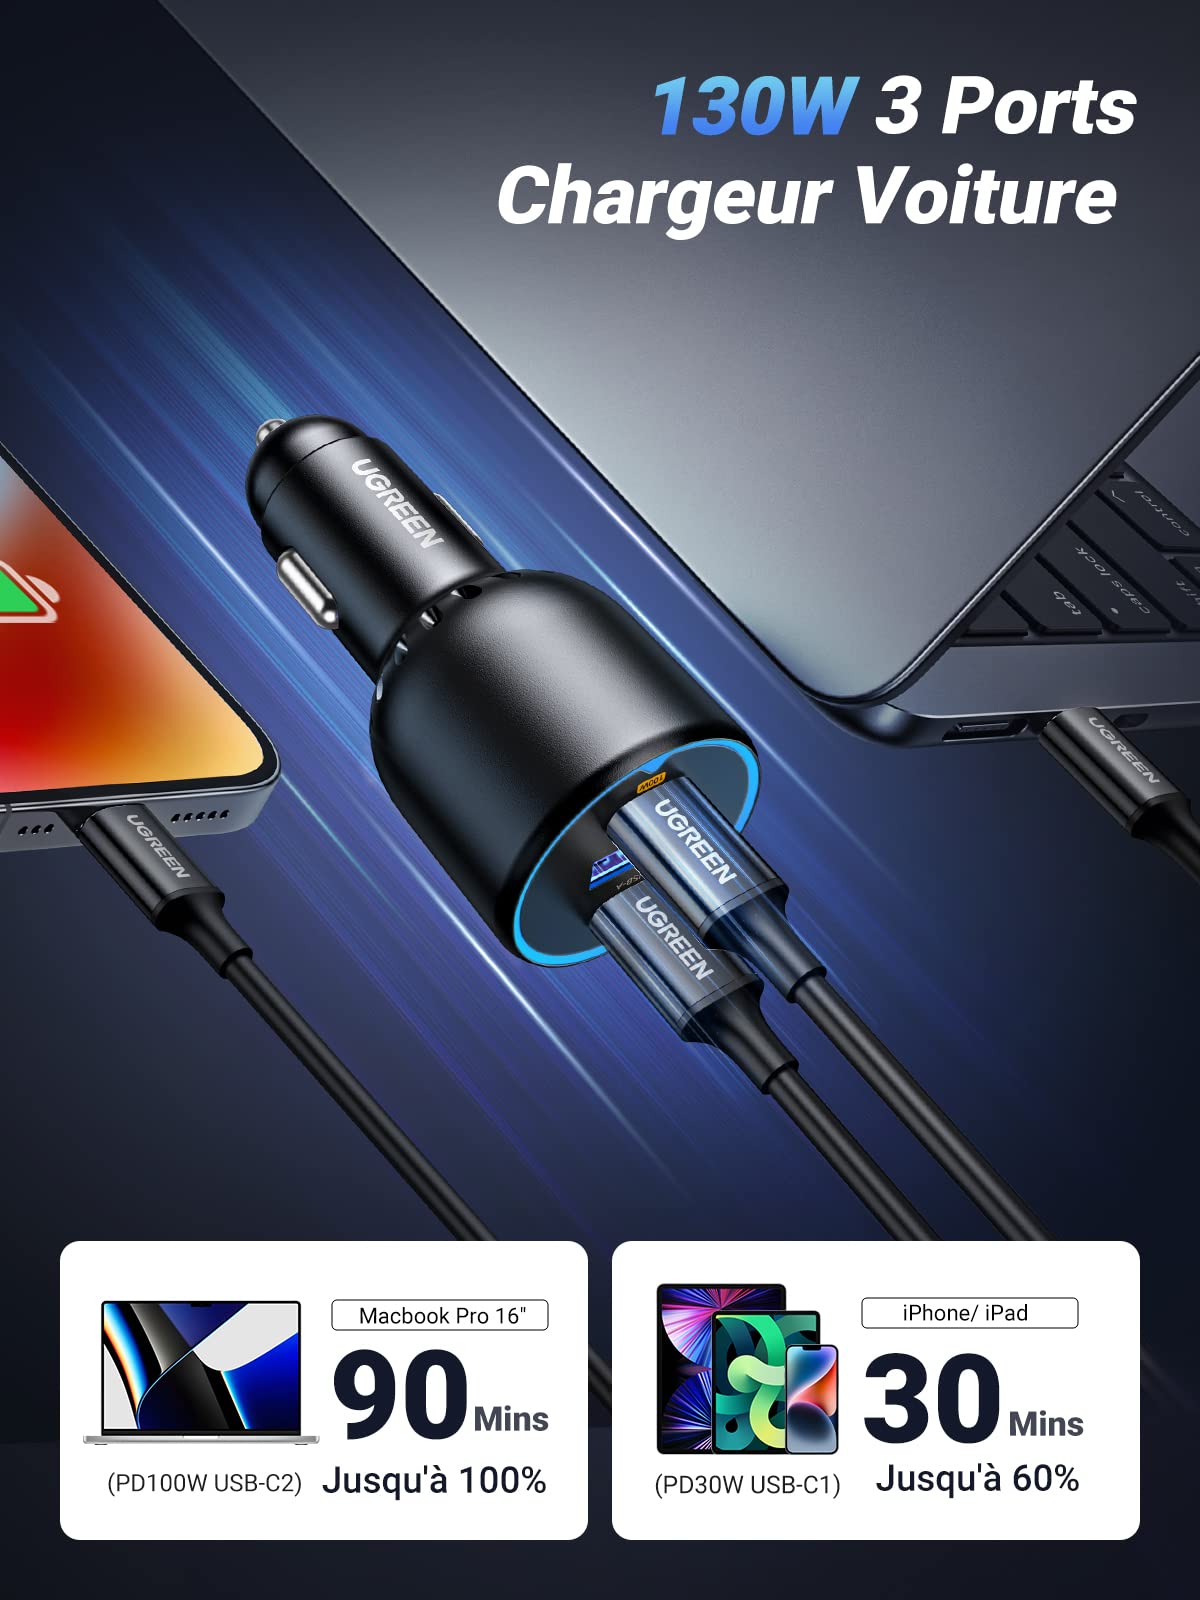 Chargeur Voiture UGREEN 130W – 3 Ports pour Chargement Rapide